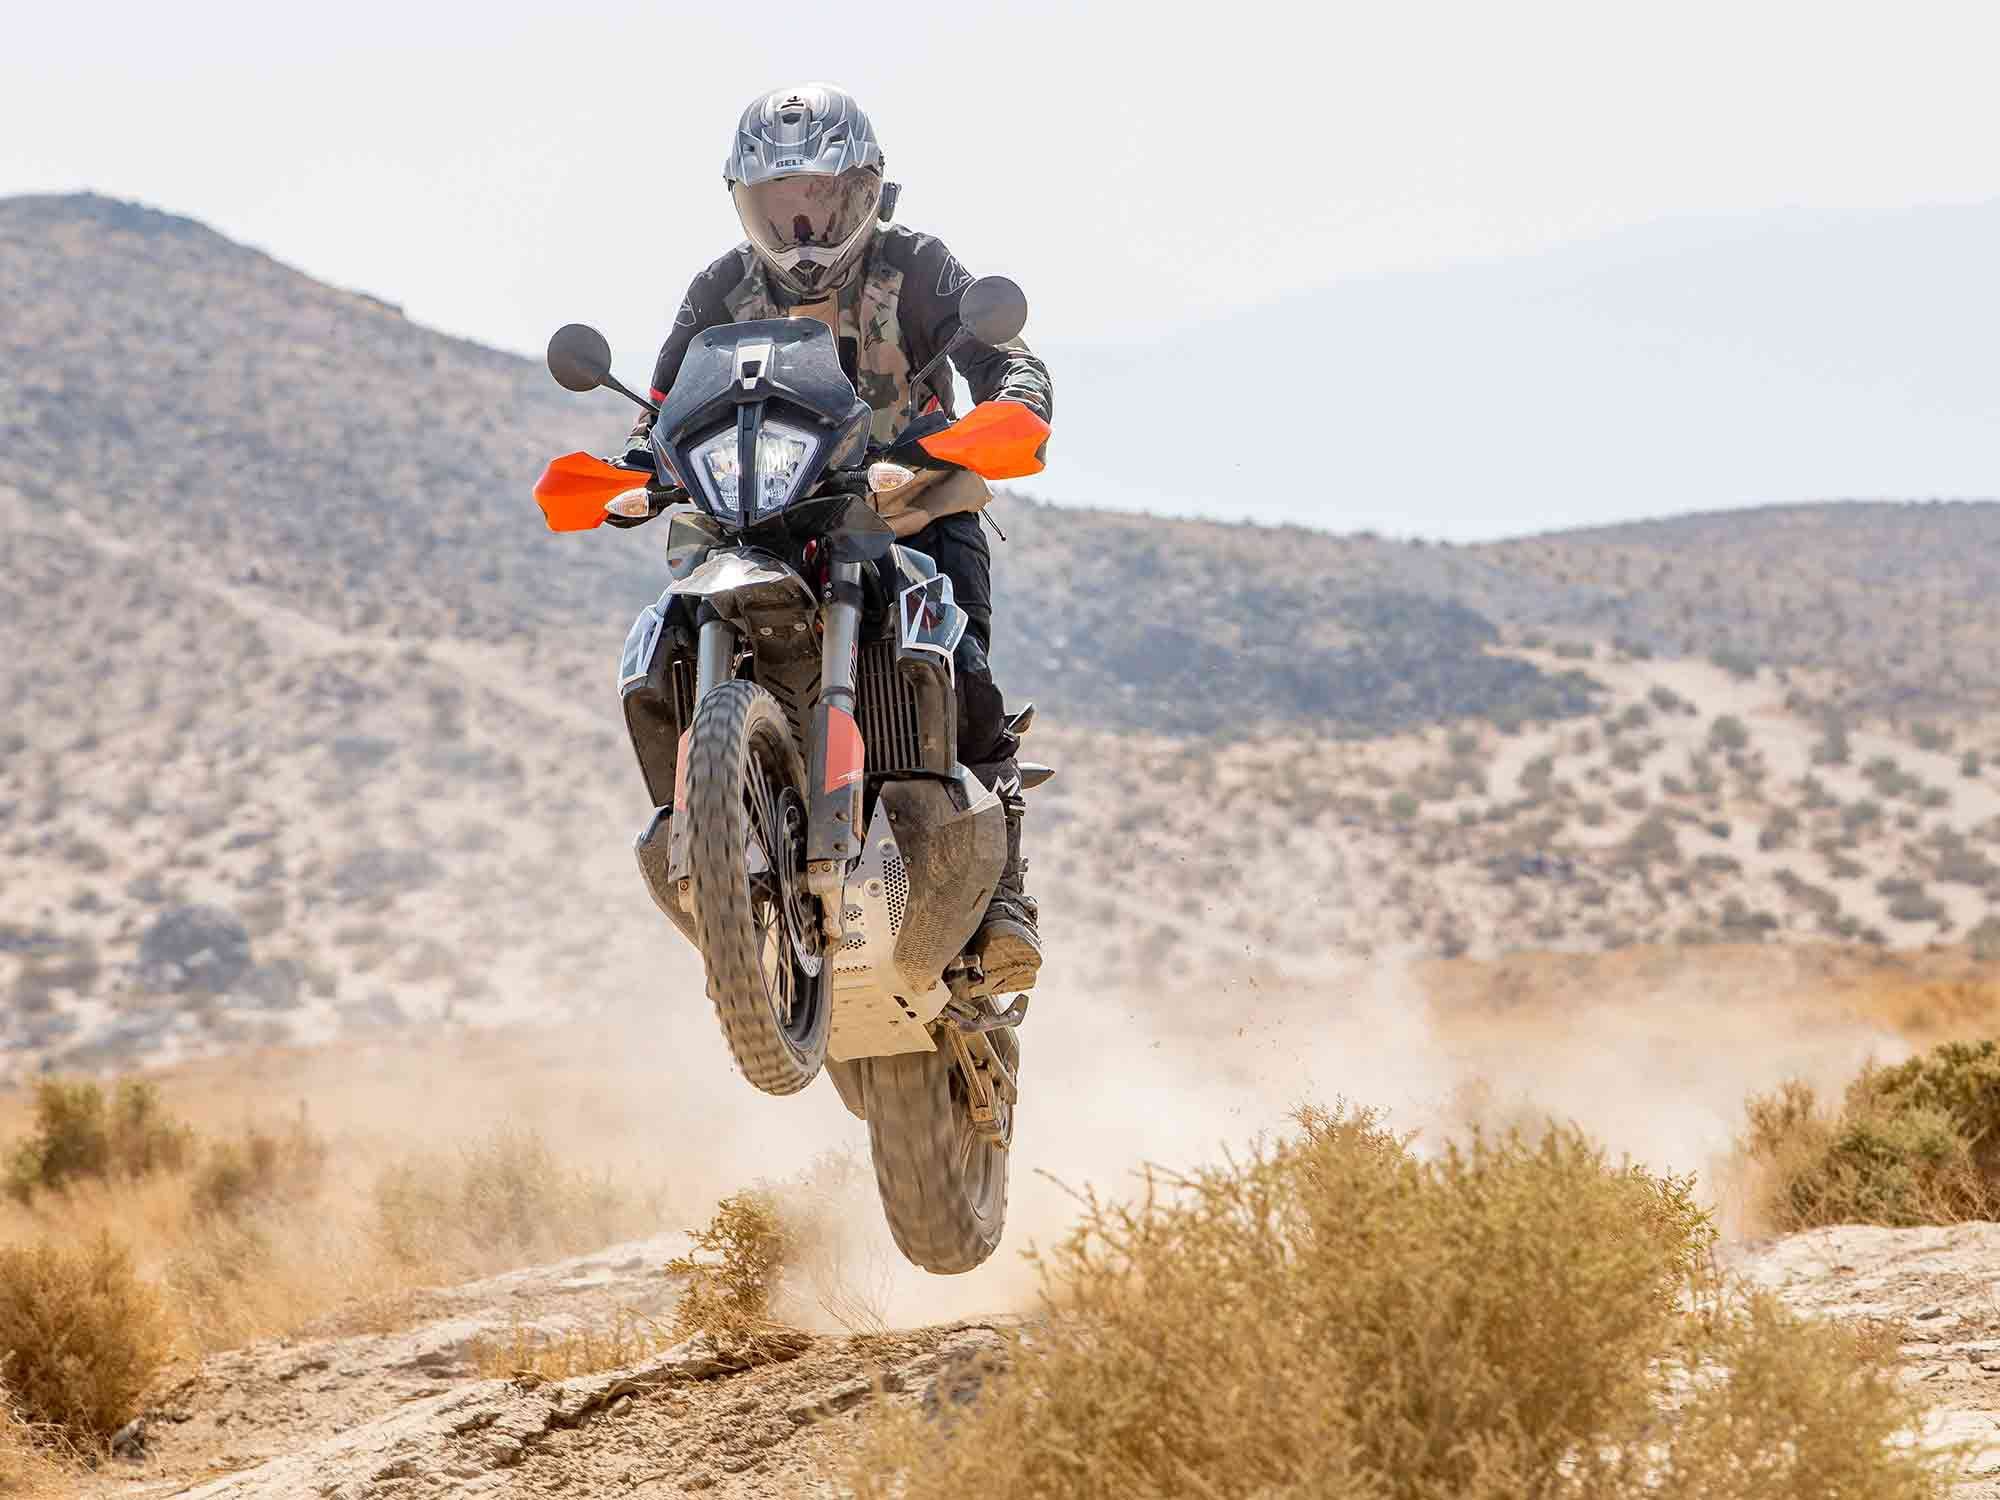 The KTM 790 Adventure R continues to be the most extreme and capable adventure motorcycle you can buy.